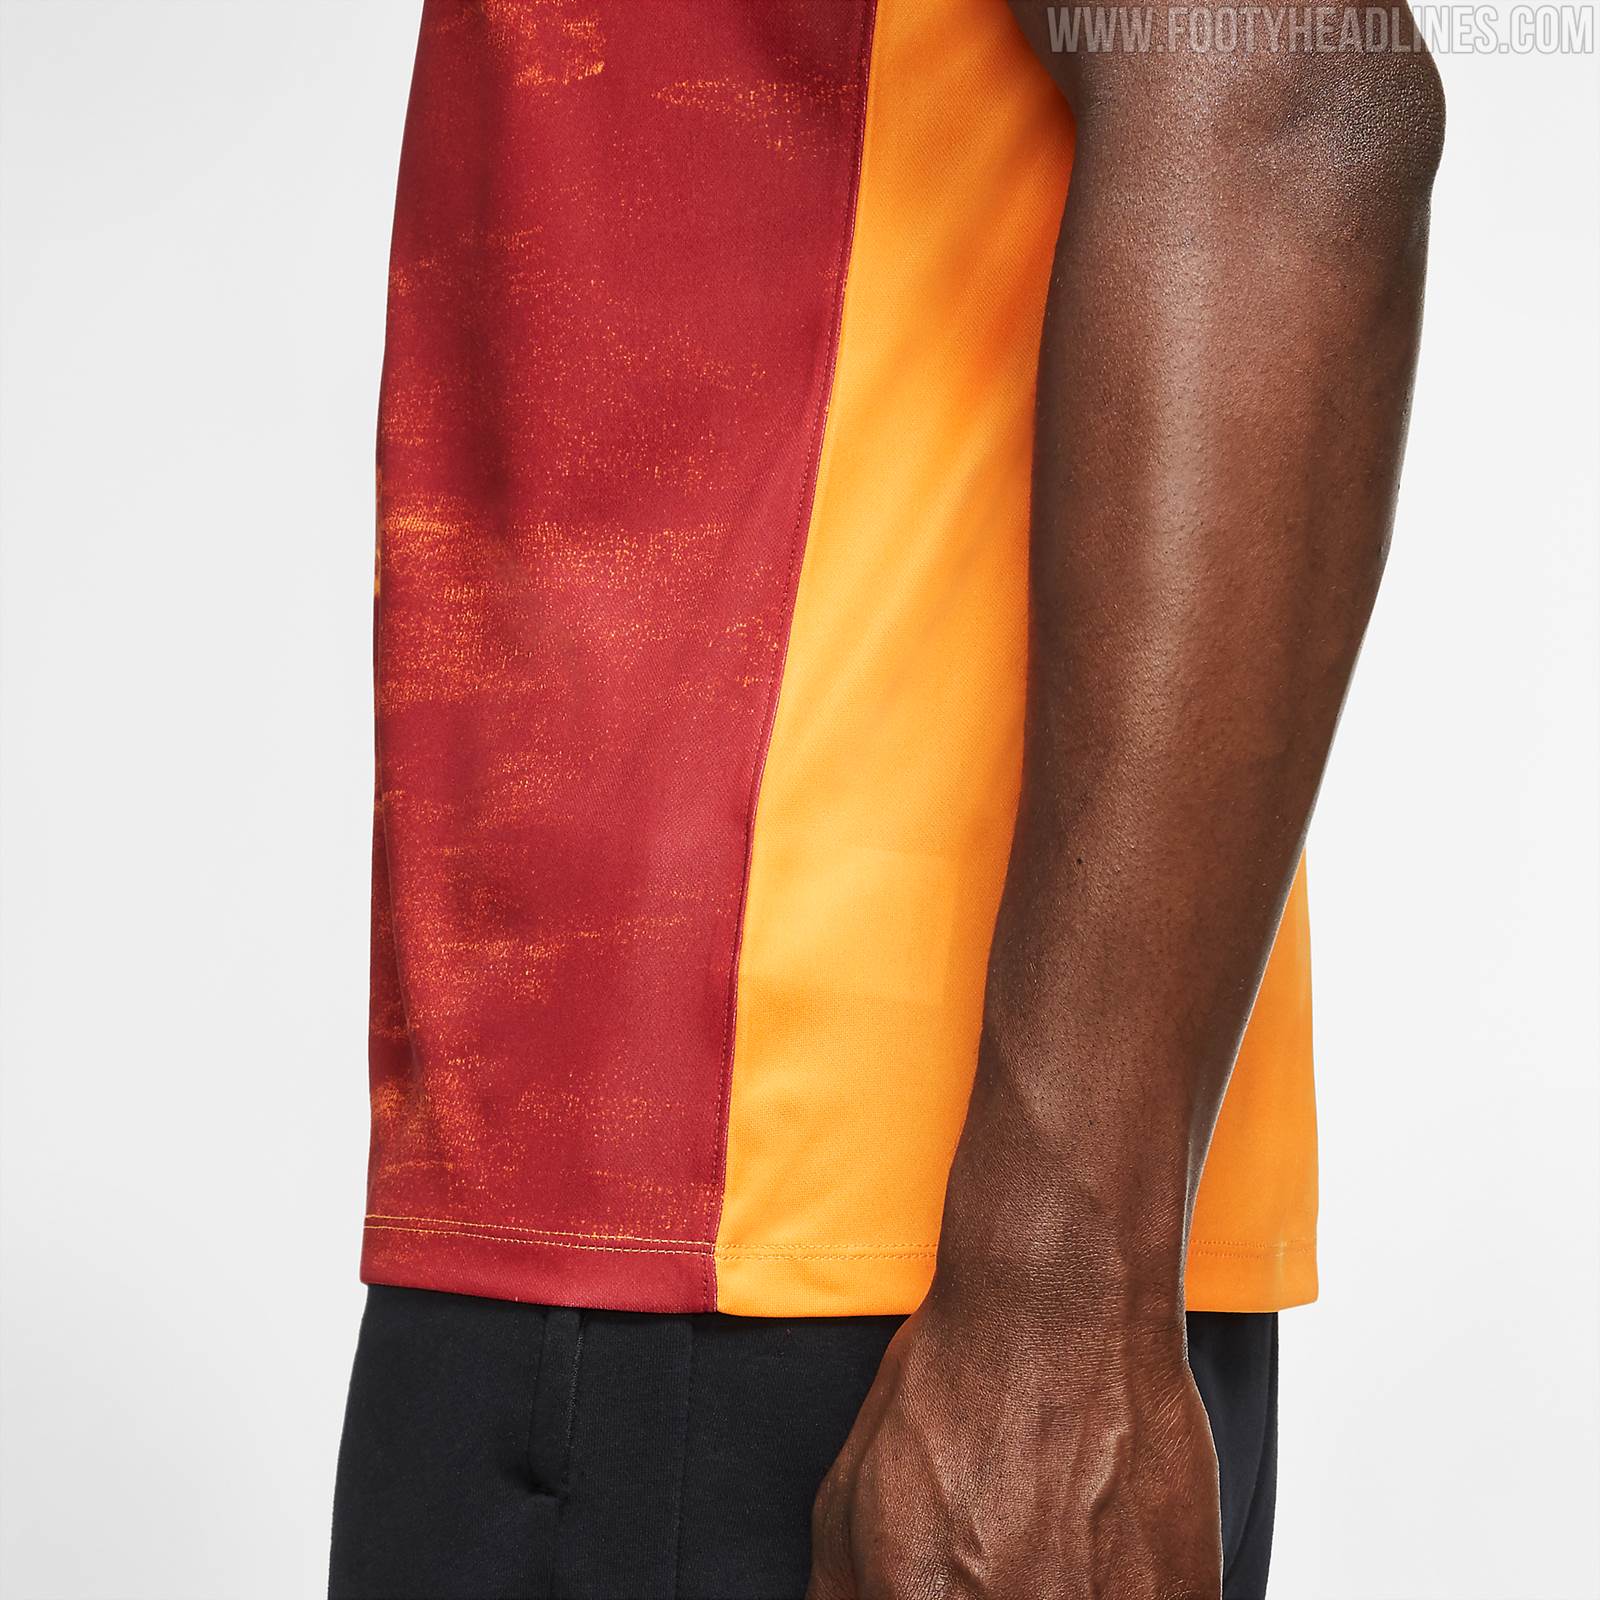 Galatasaray Third Jersey 2020/2021 Nike Men's New with Tags M-L-XL